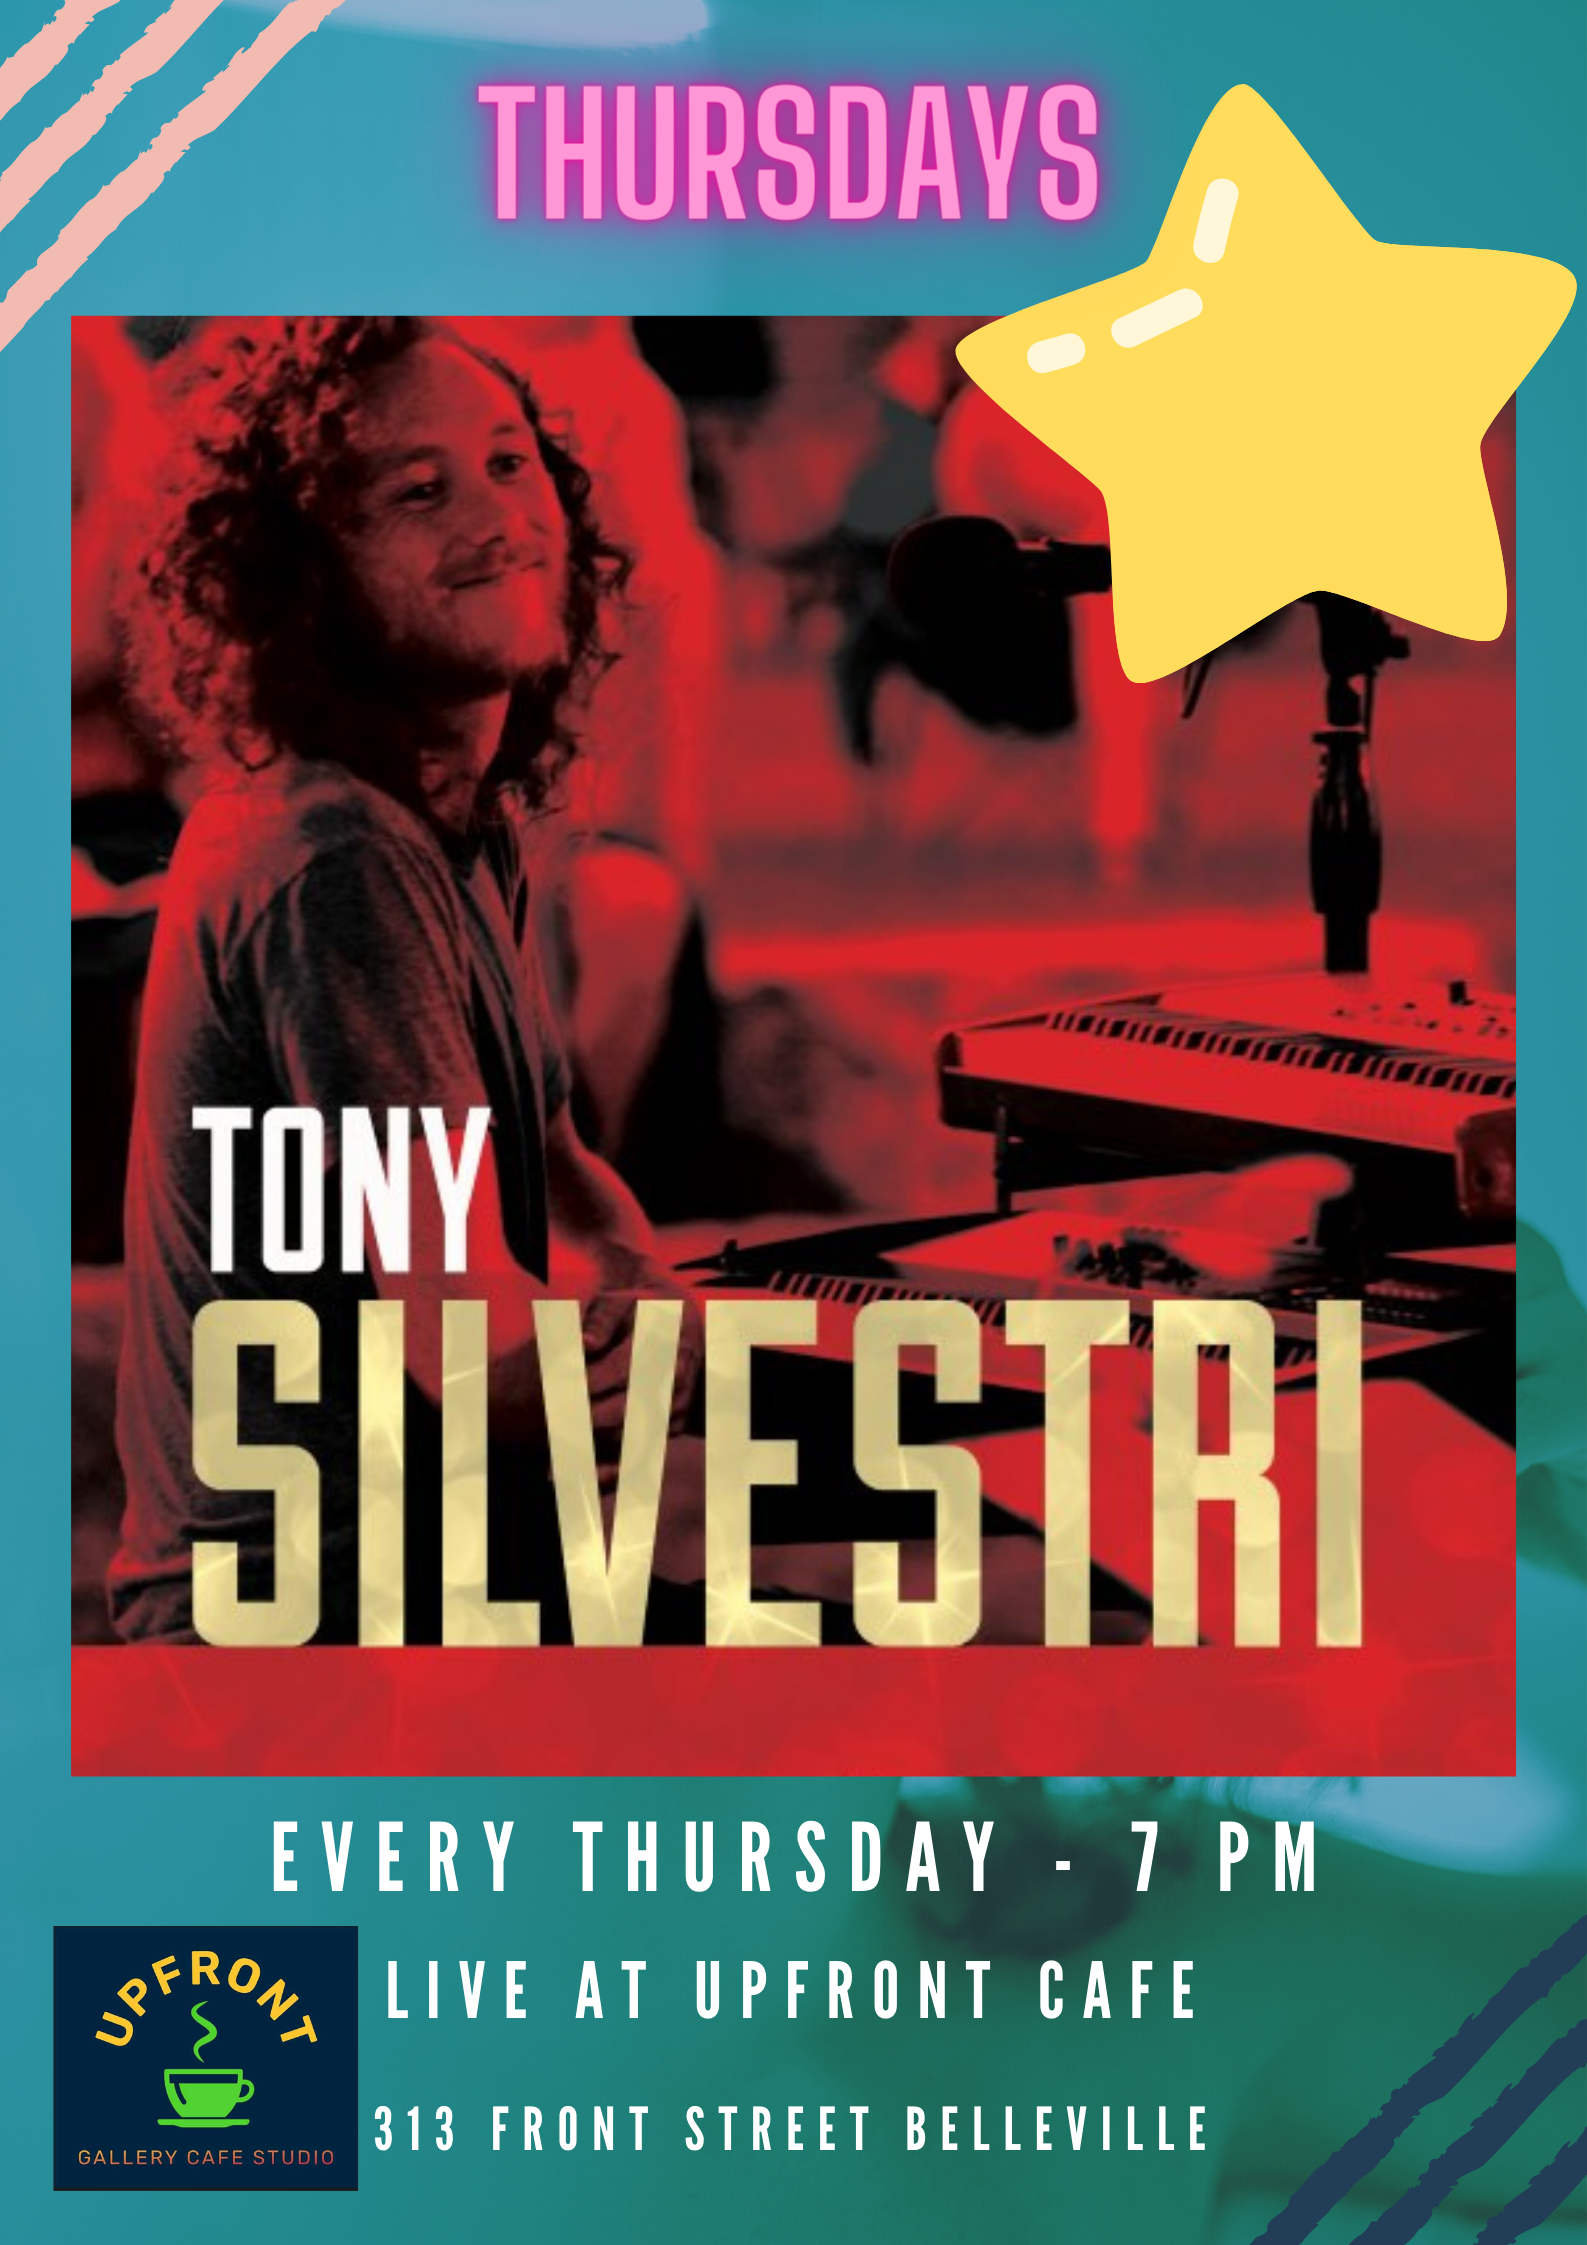 Poster with edited photo of Tony Silvestri and has his name as a title.